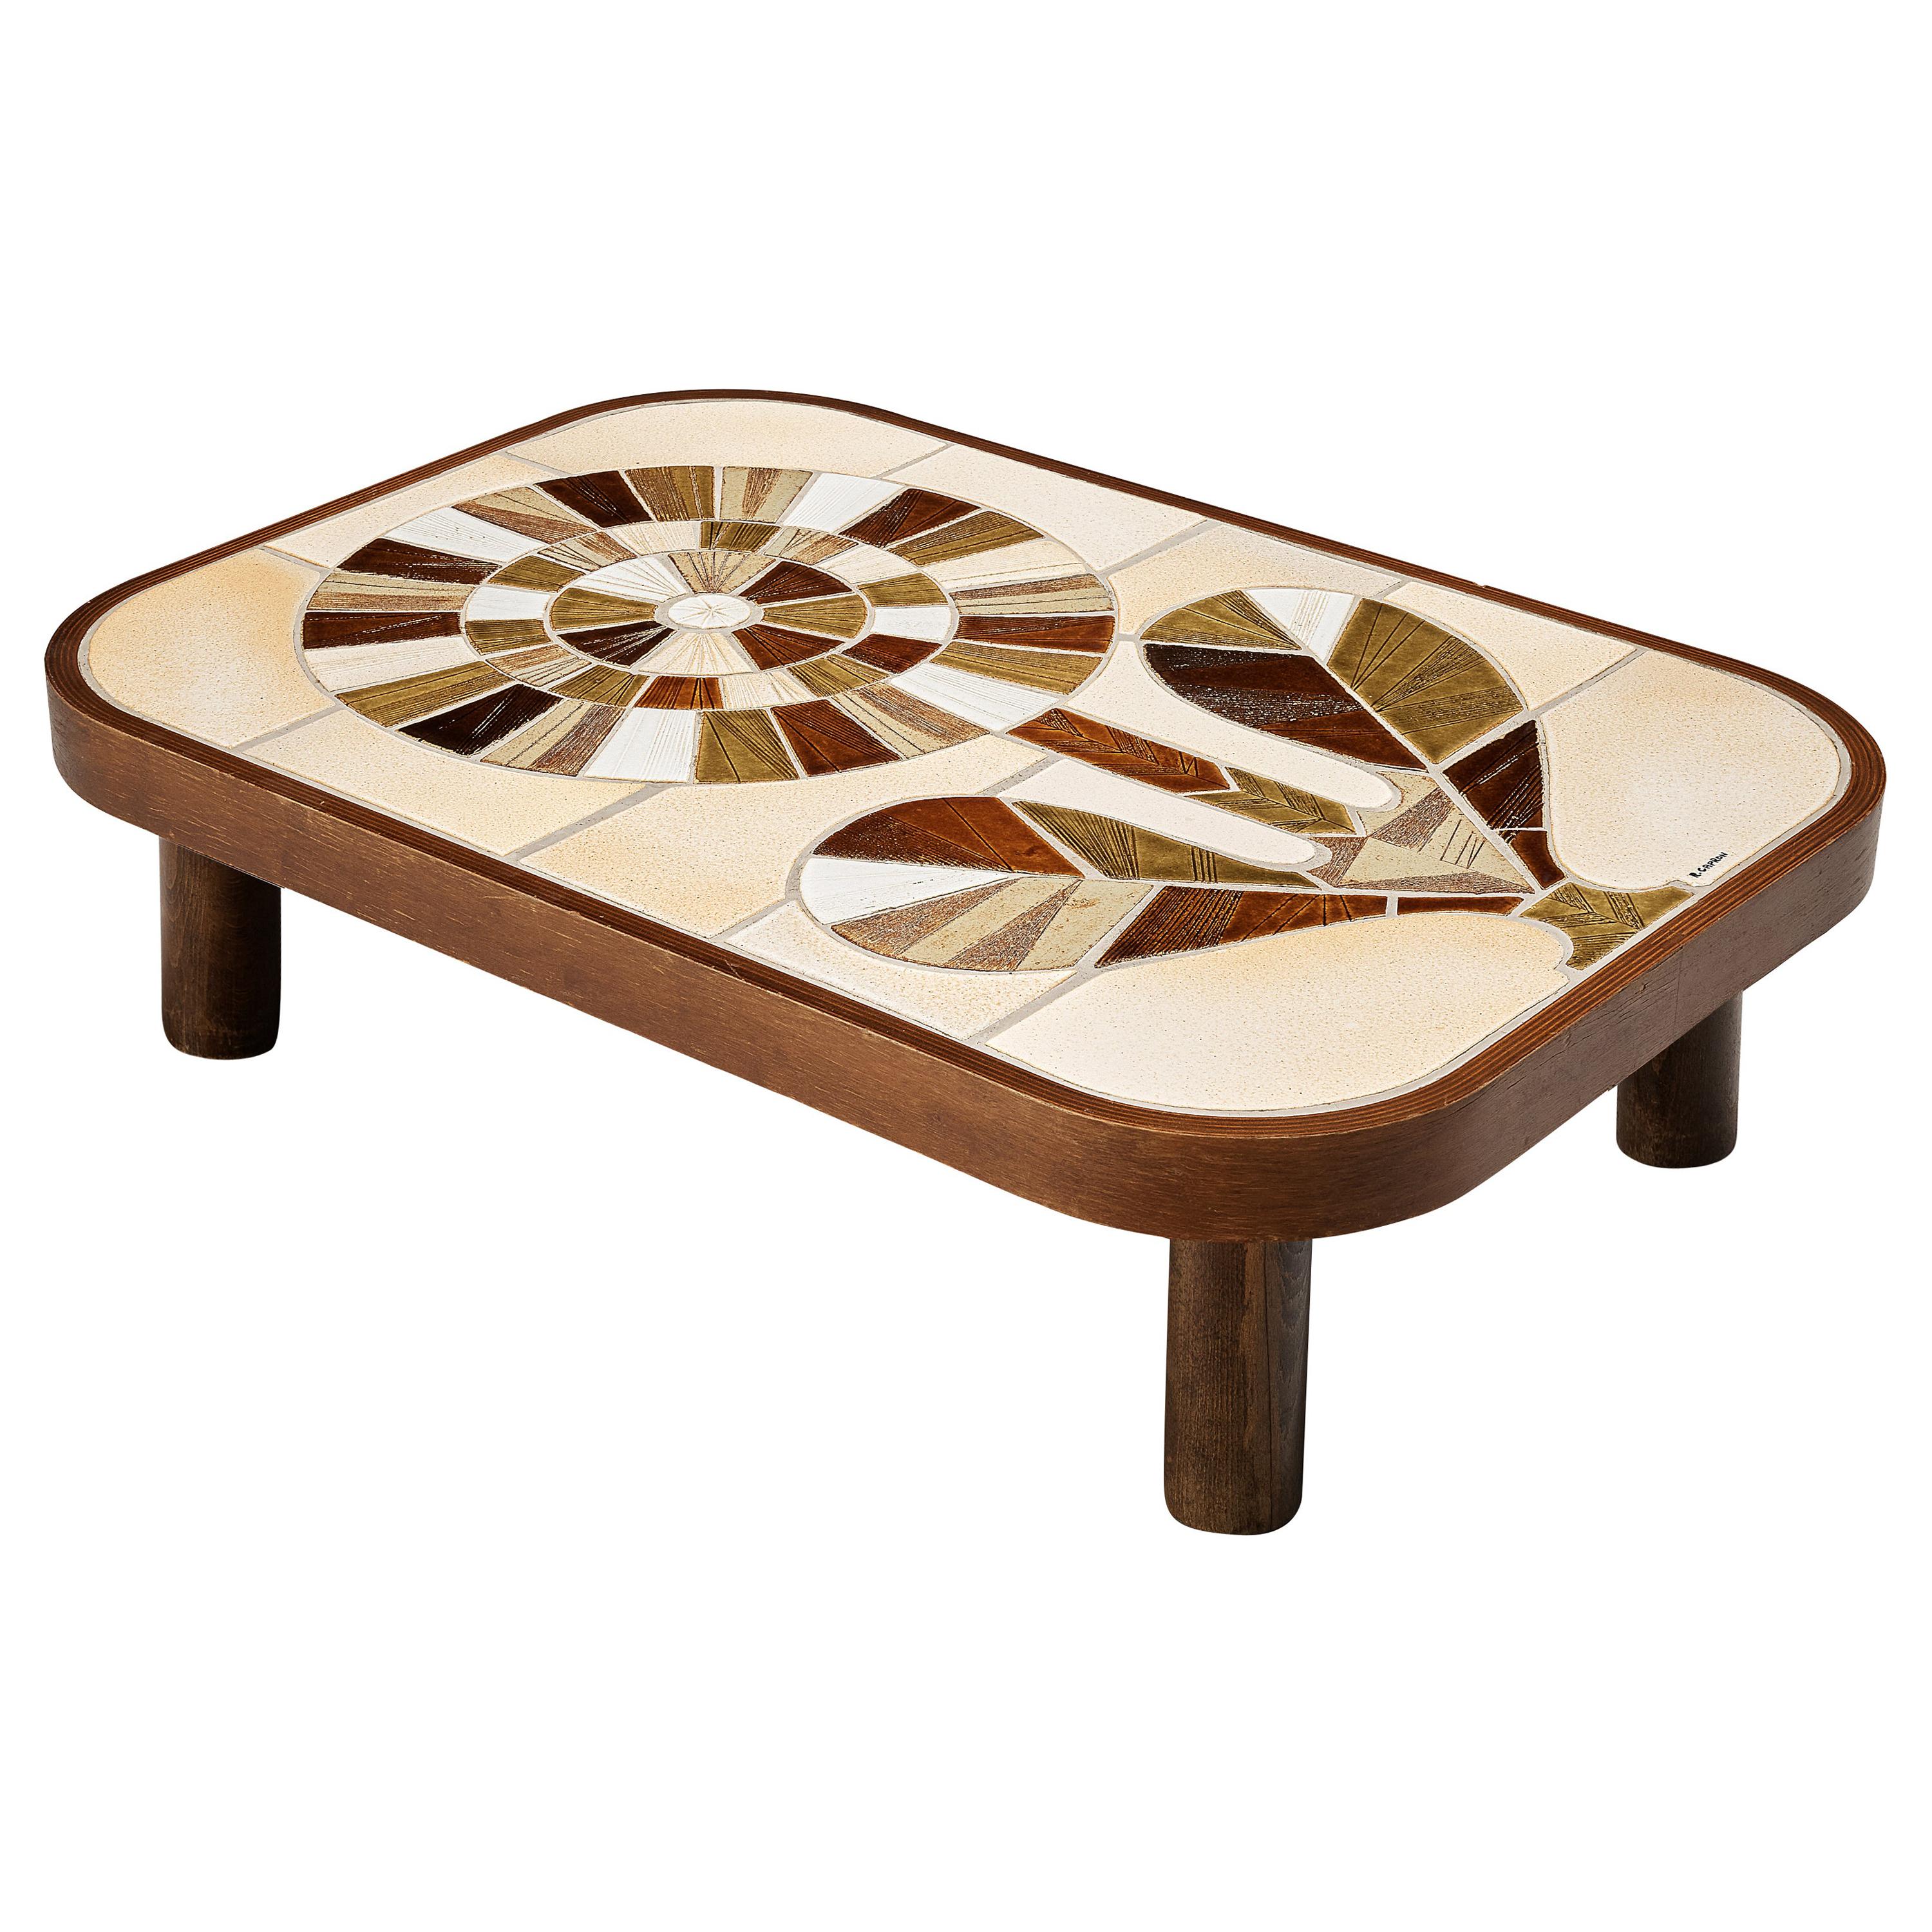 Roger Capron Coffee Table in Ceramic with Floral Motif